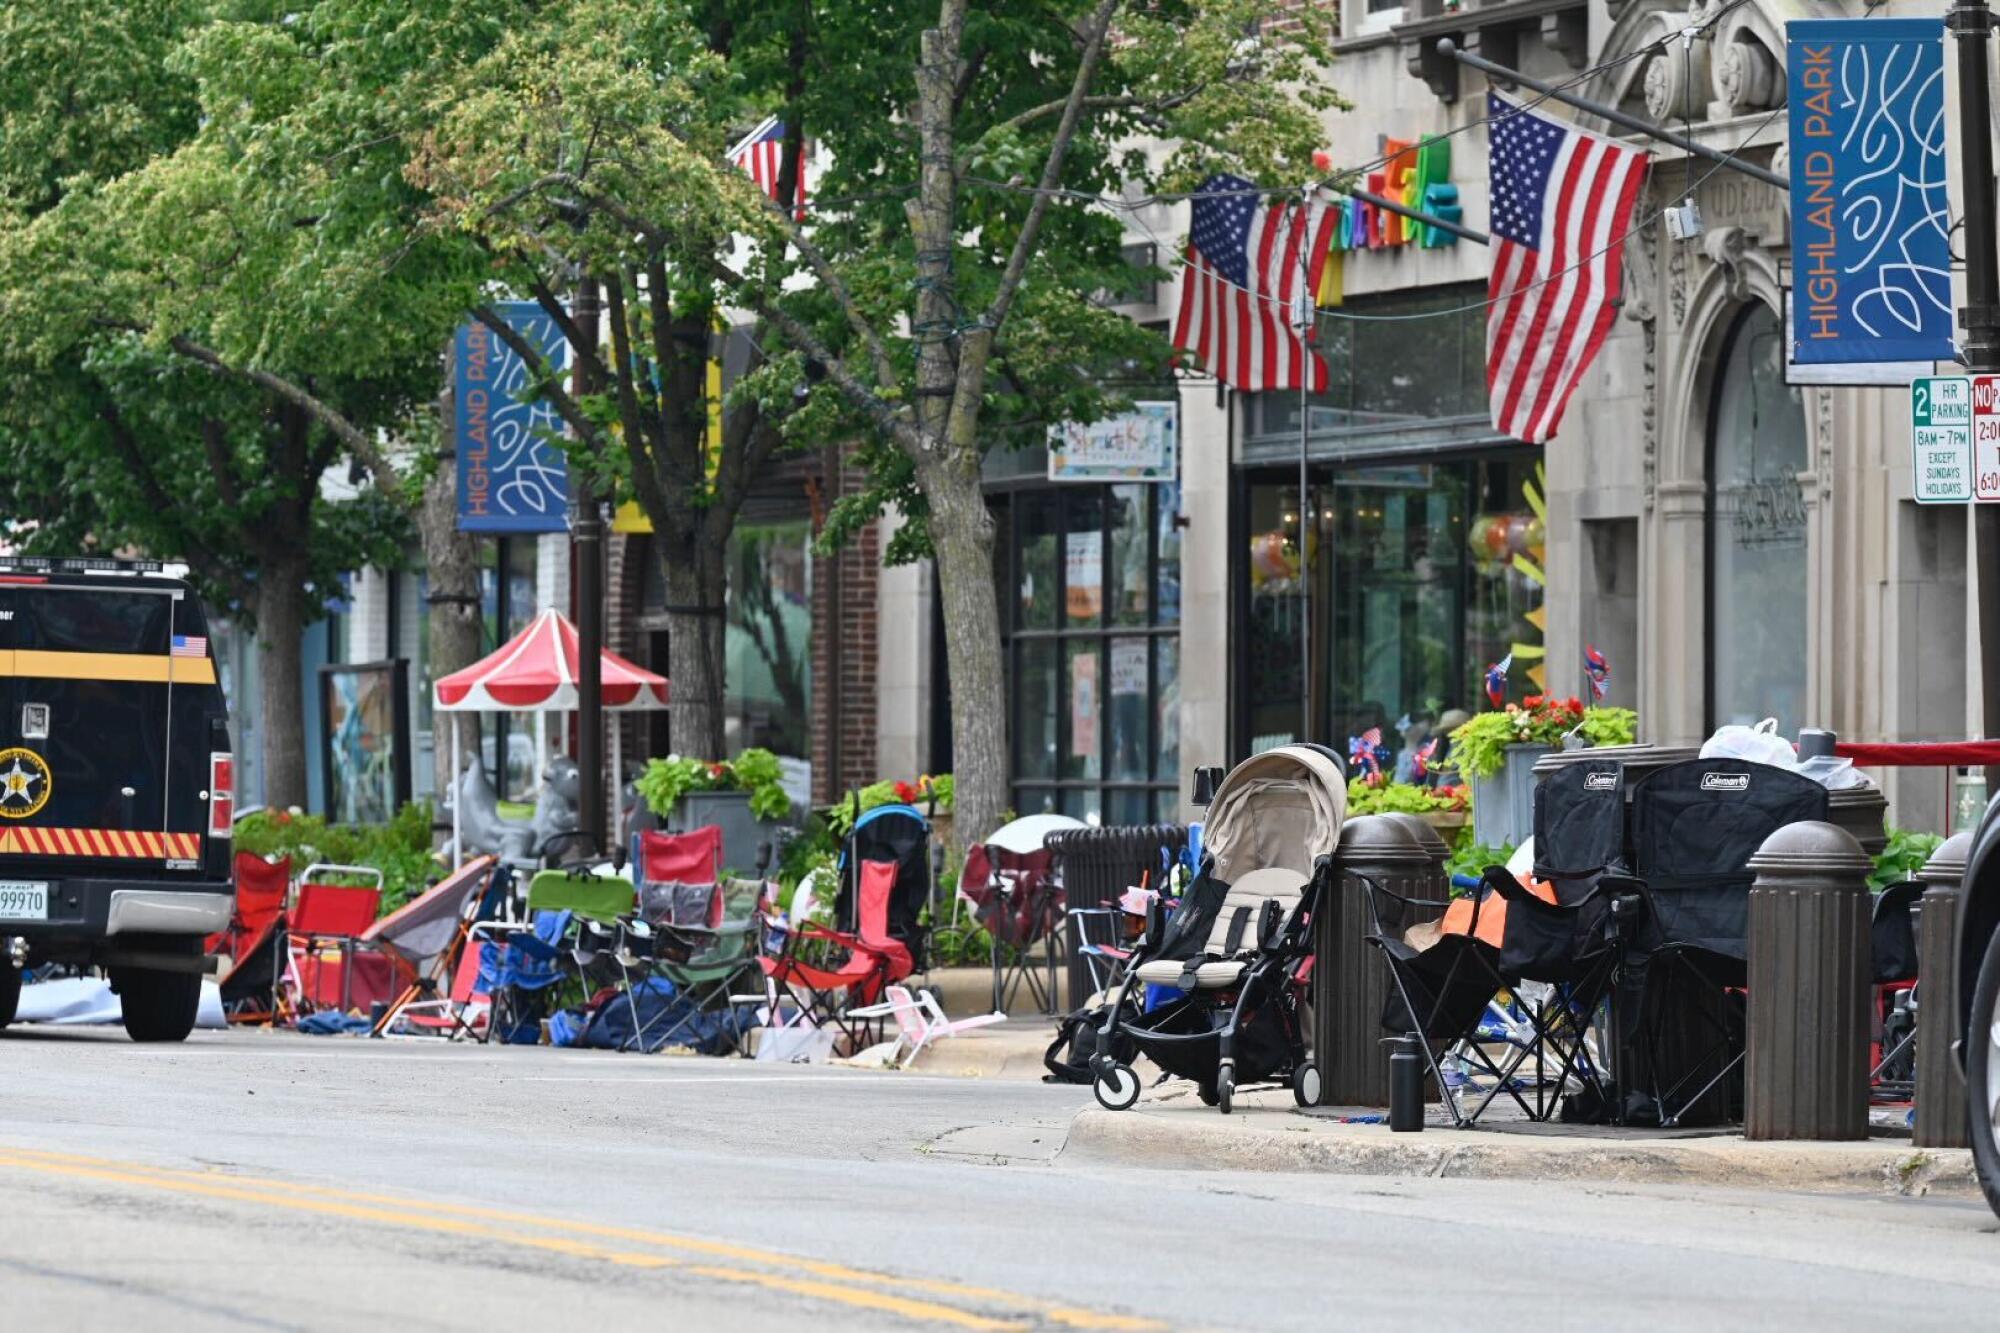 Chairs and empty strollers sit abandoned along the parade route.